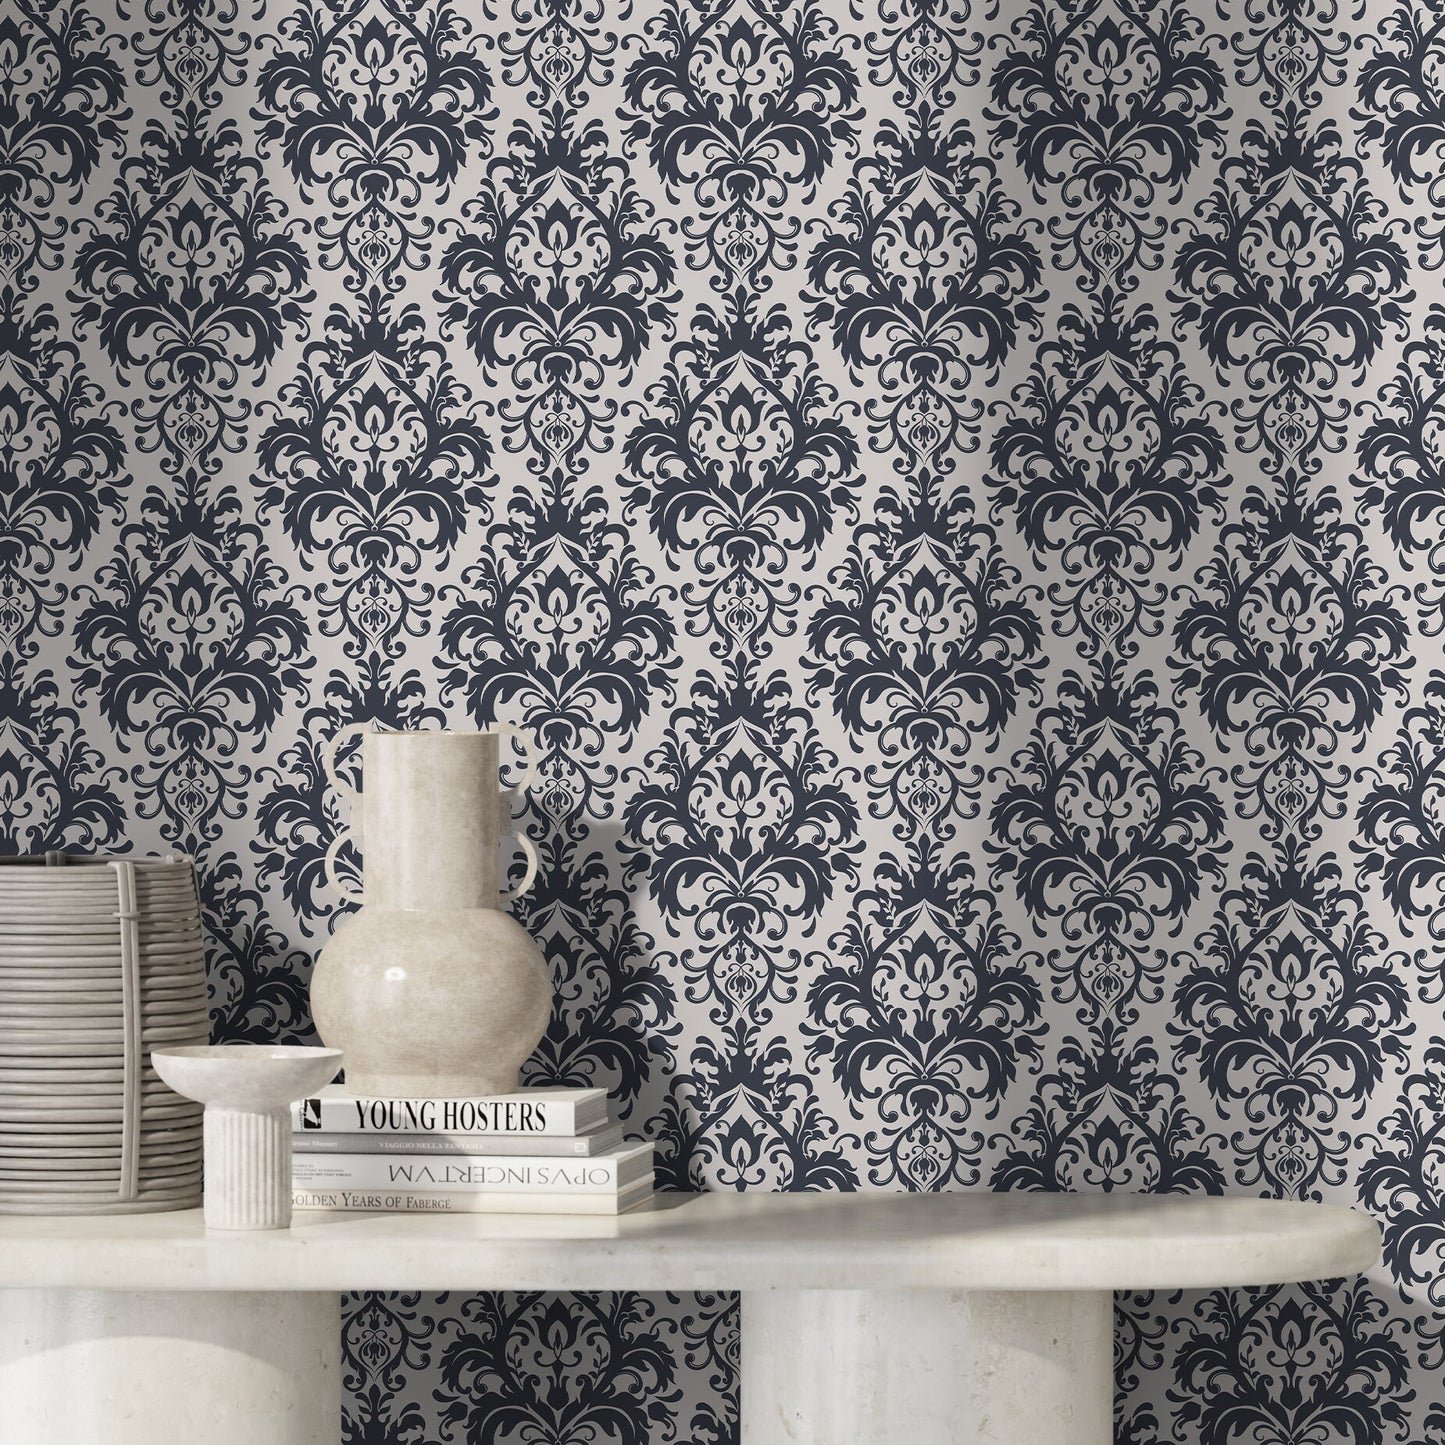 Removable Wallpaper Peel and Stick Wallpaper Wall Paper Wall Mural - Portuguese Azulejos Tile Wallpaper - C184